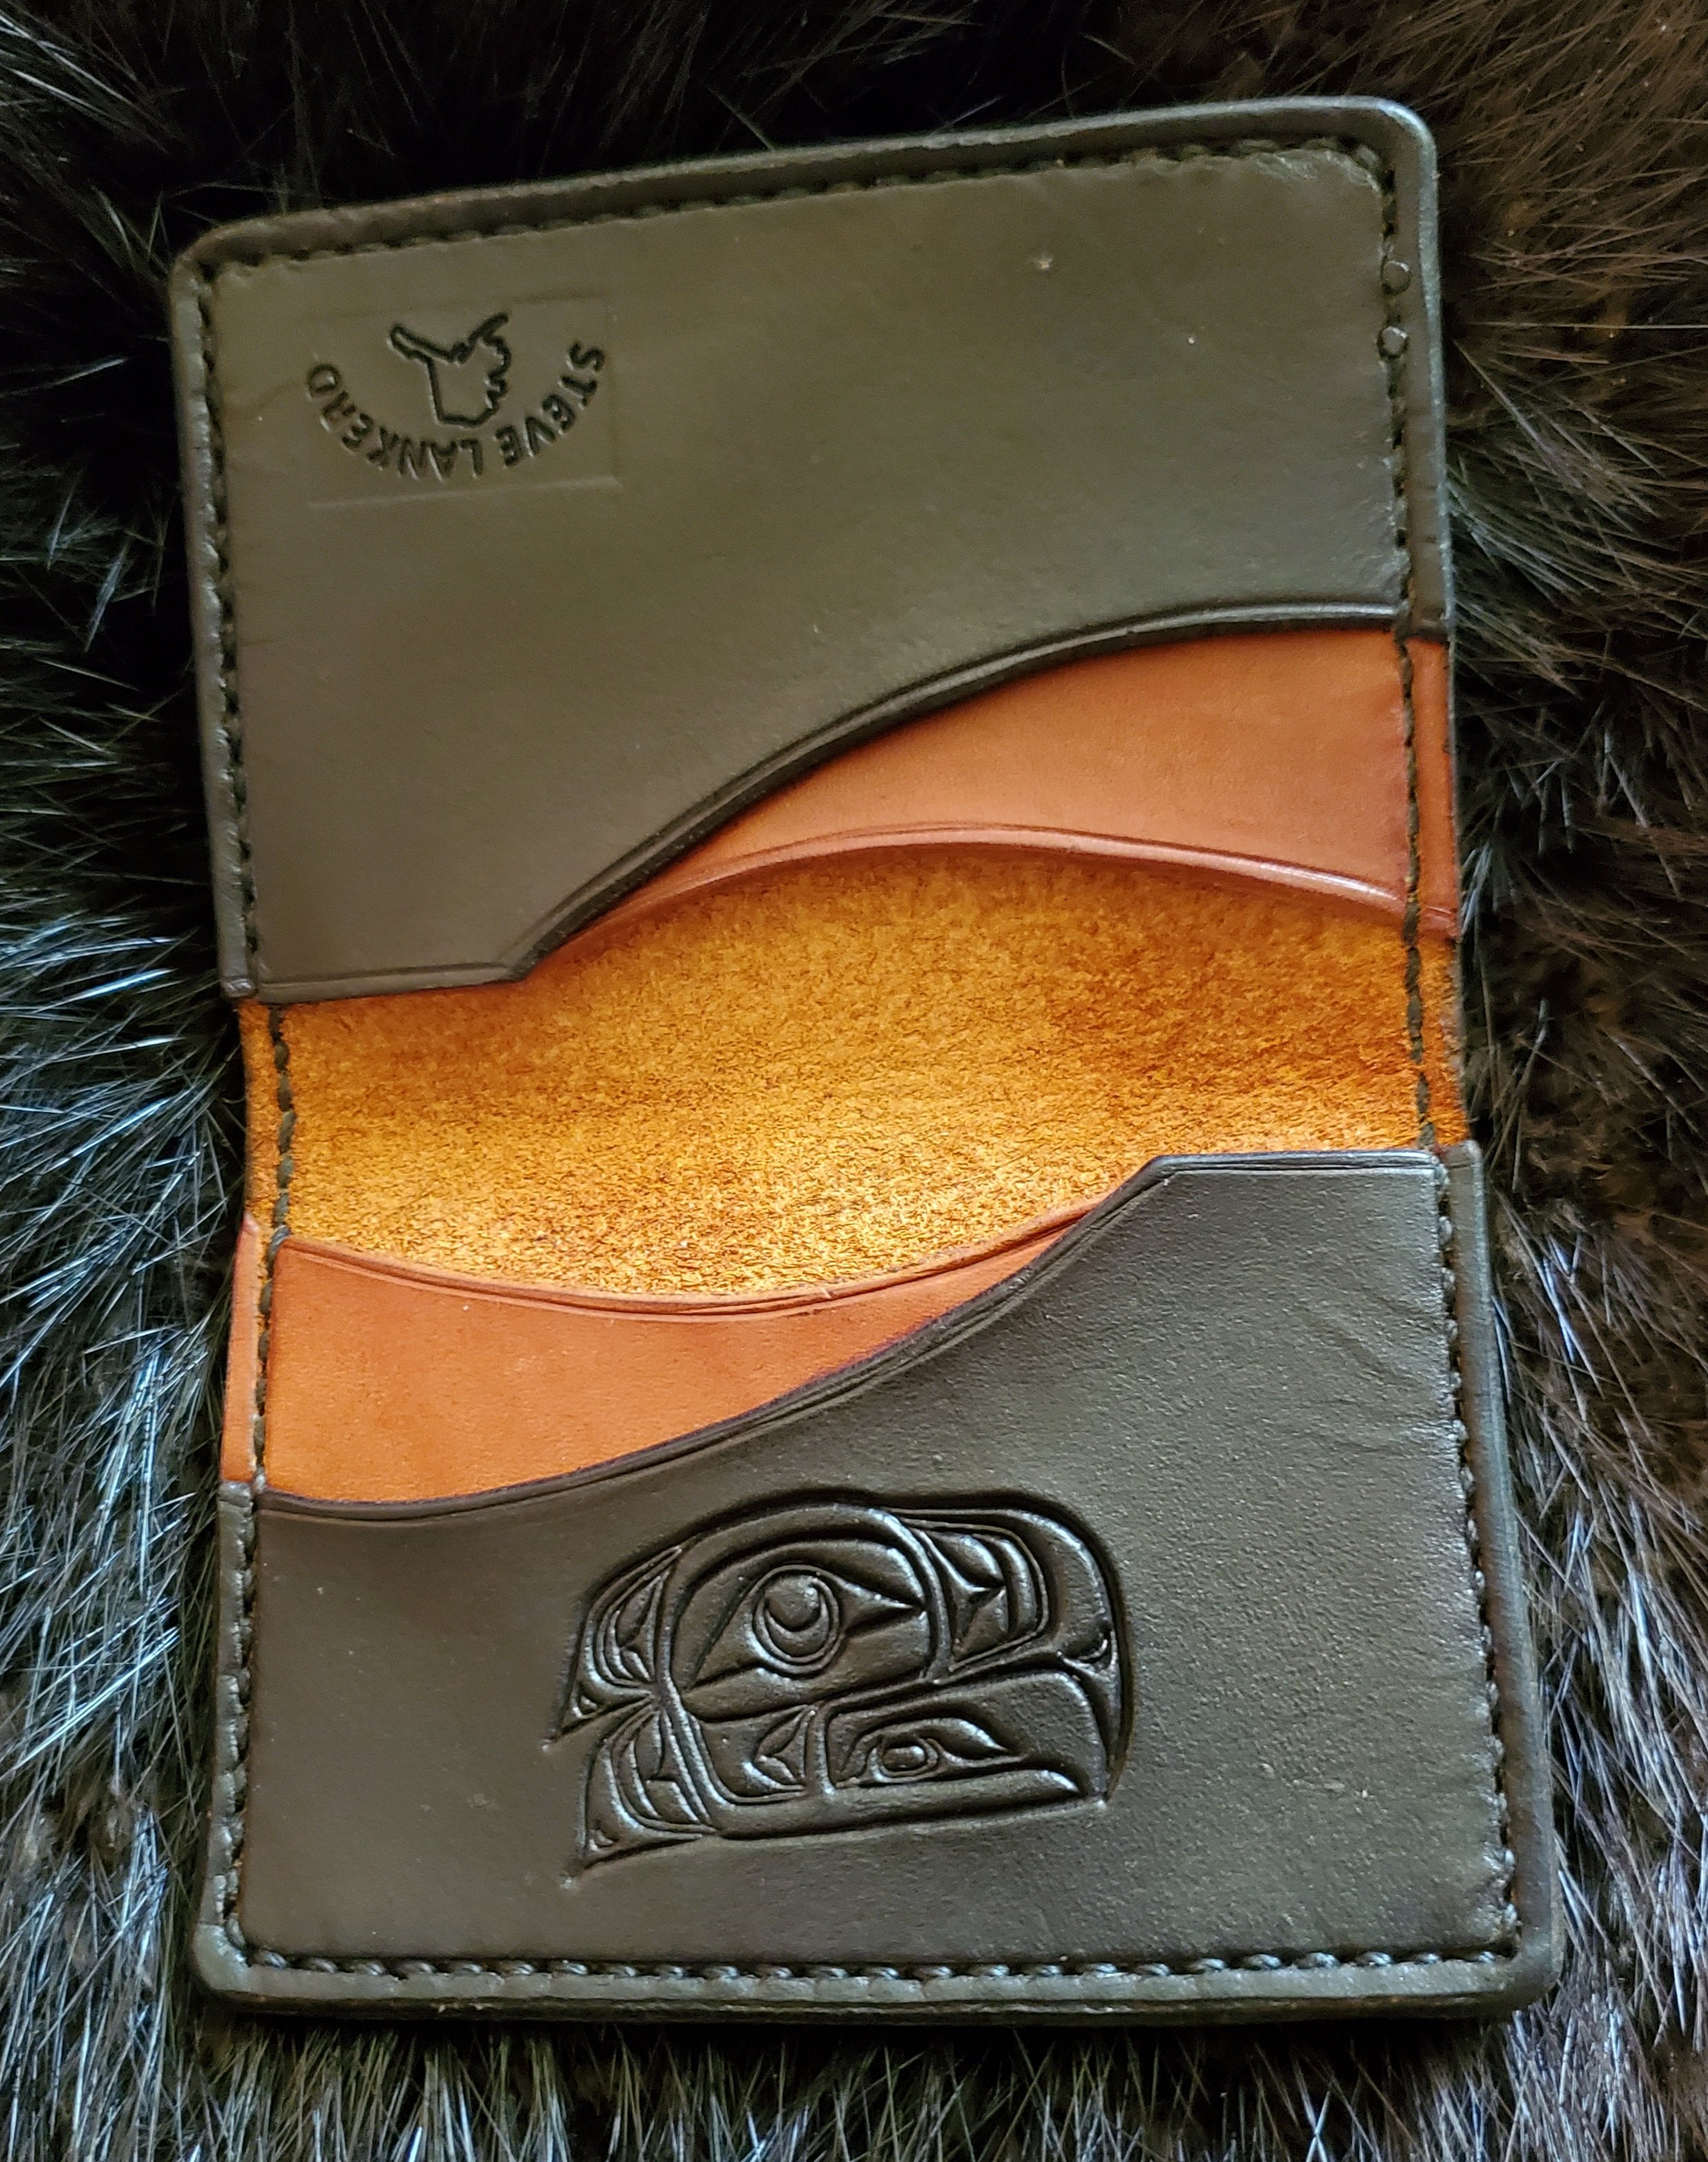 (Inside)  Minimalist 4 pocket Wallet hand tooled and stitched, $75.00